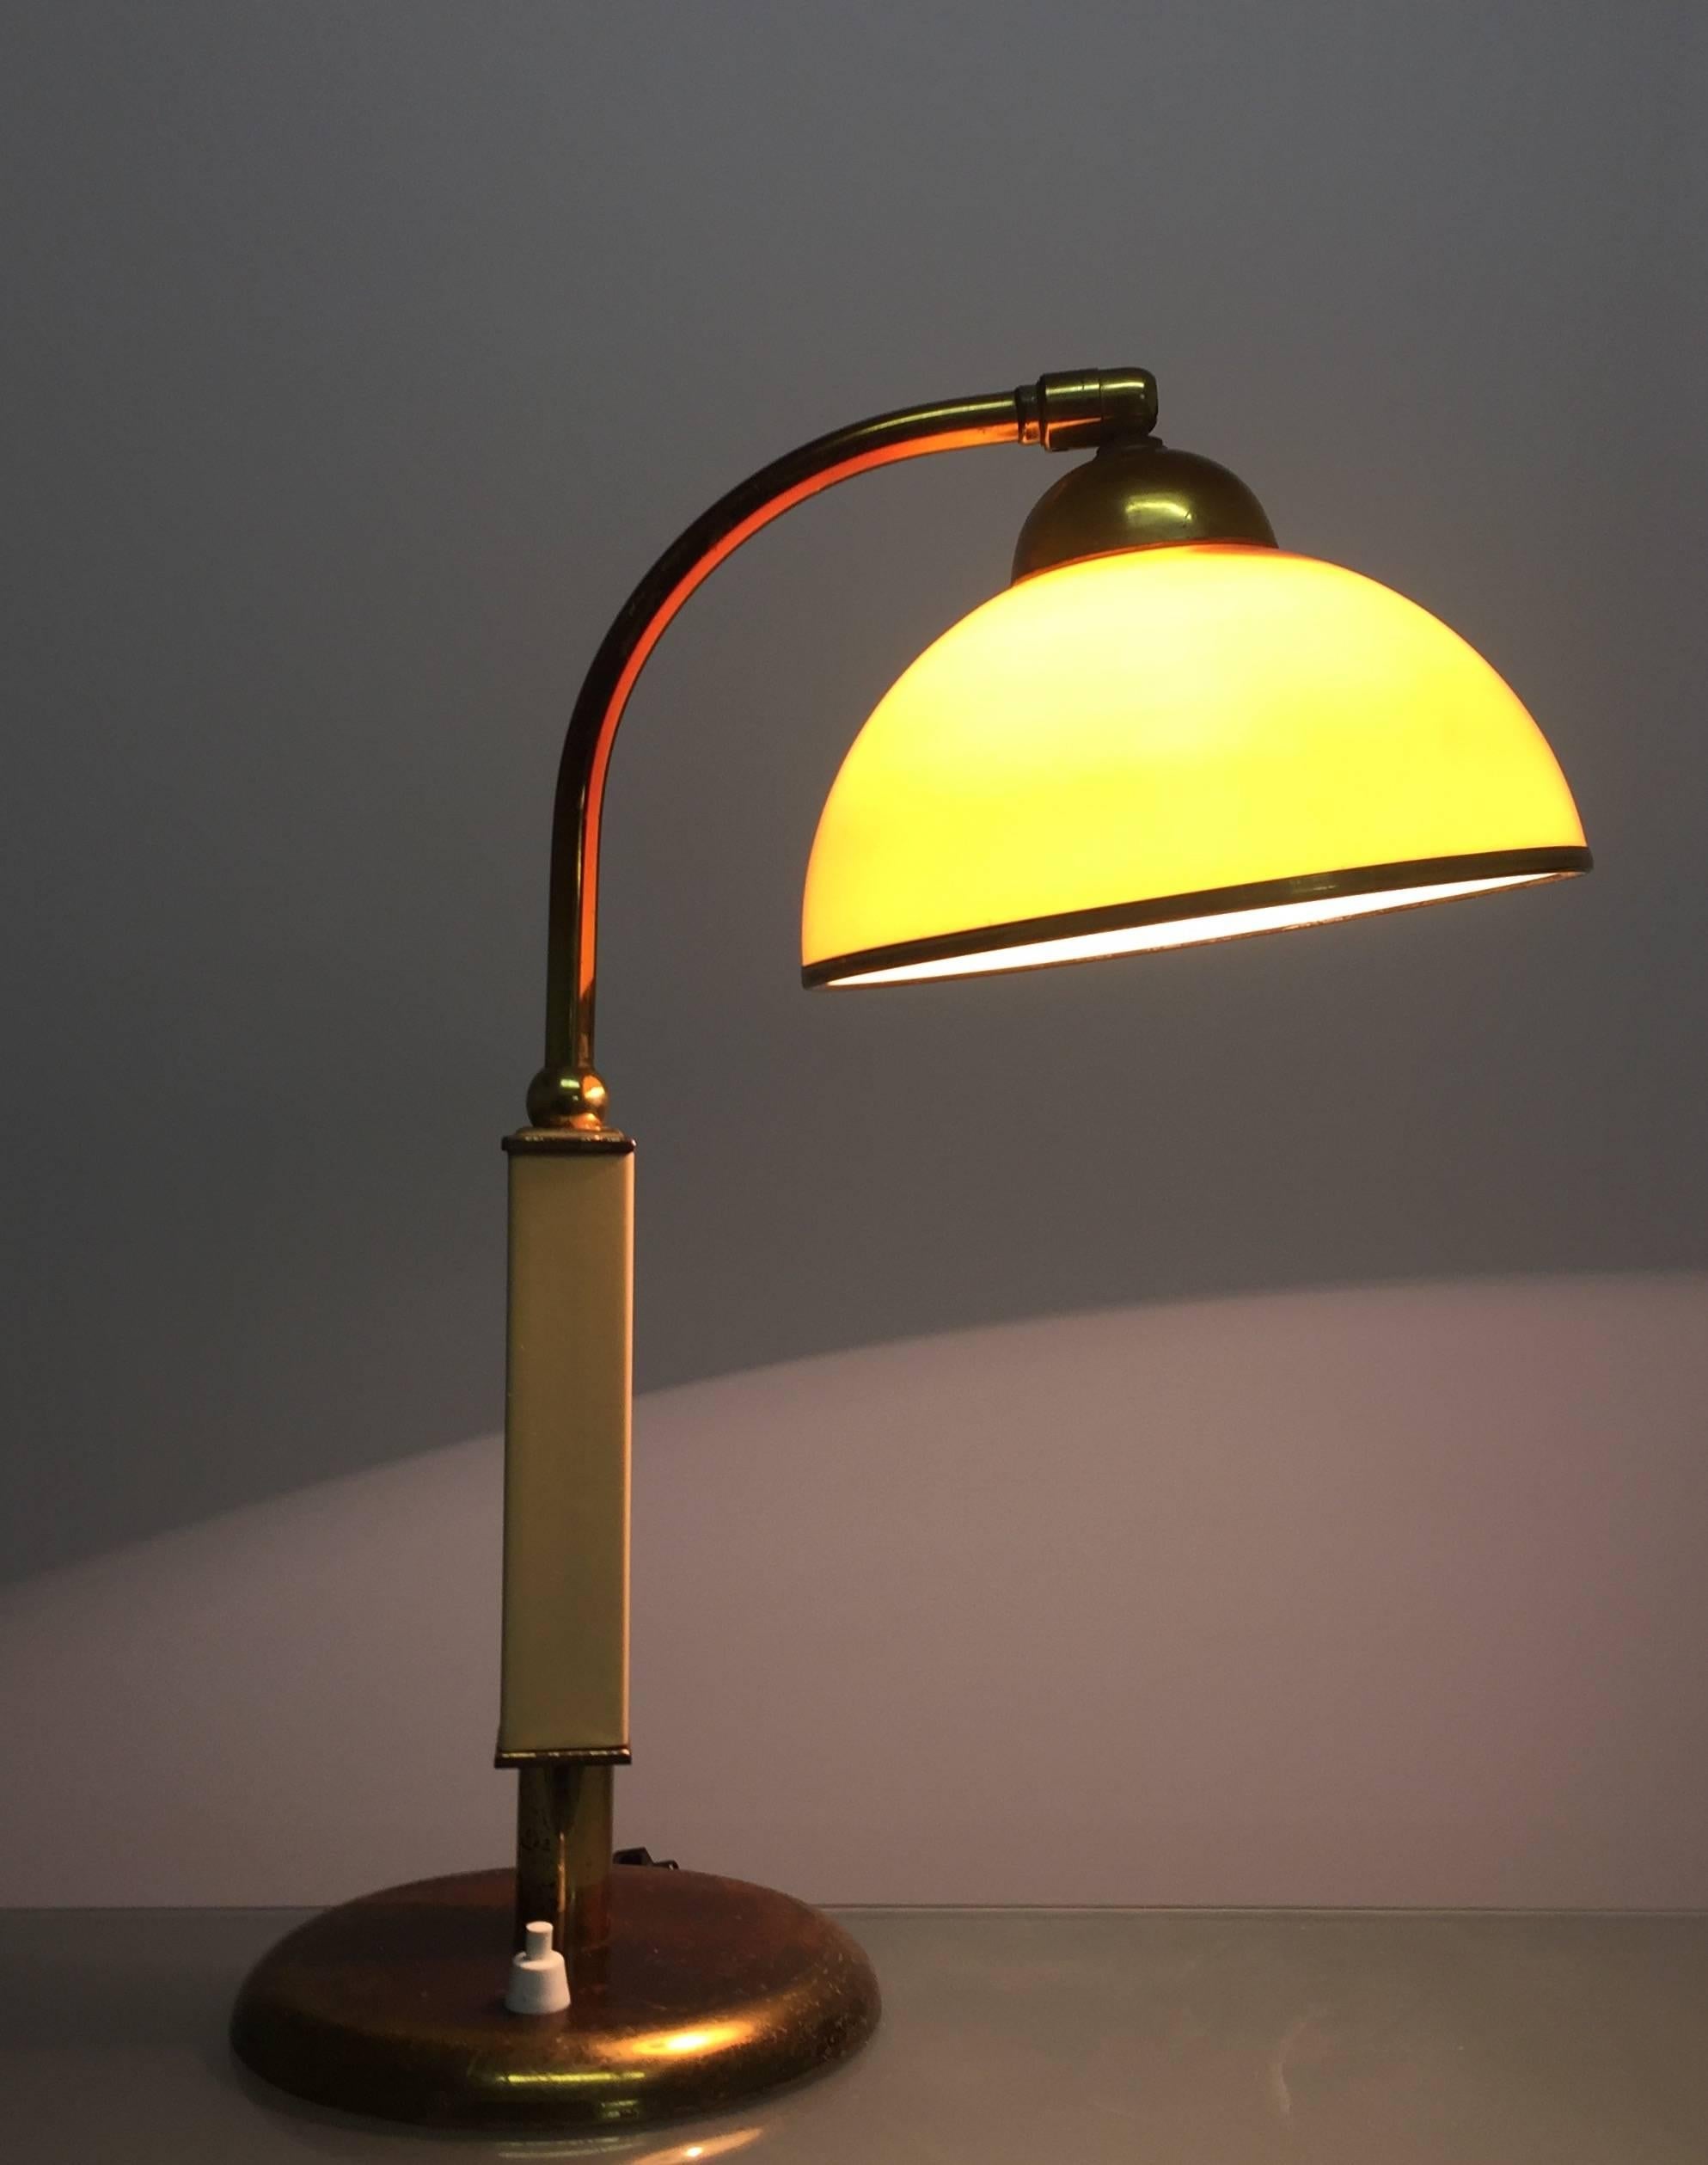 1930's style table lamps